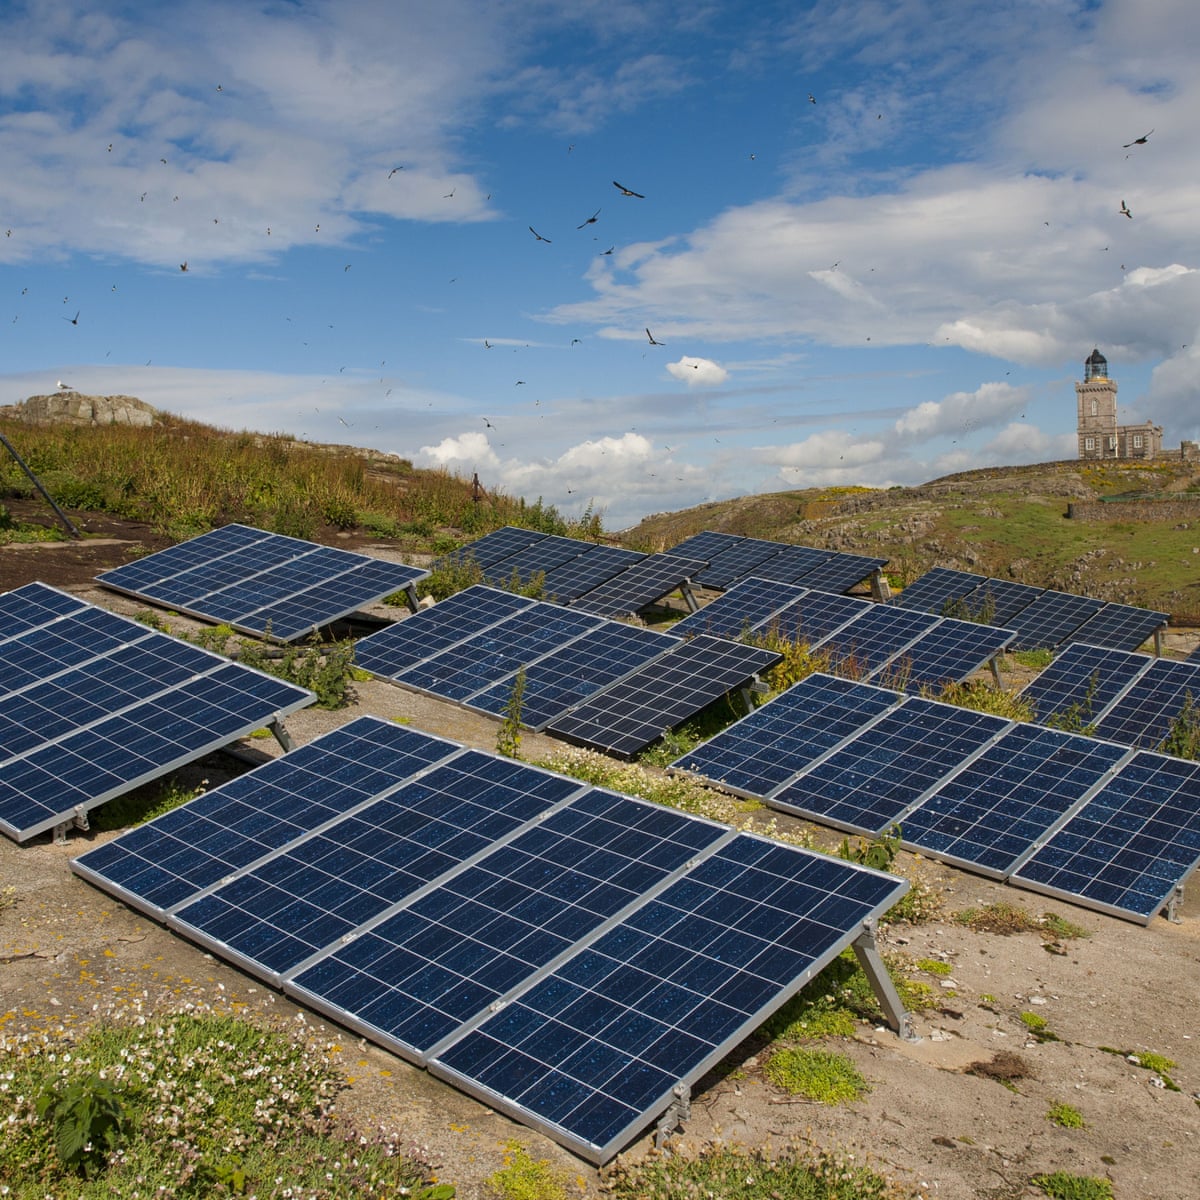 Renewable energy to expand by 50% in next five years - report | Renewable energy | The Guardian